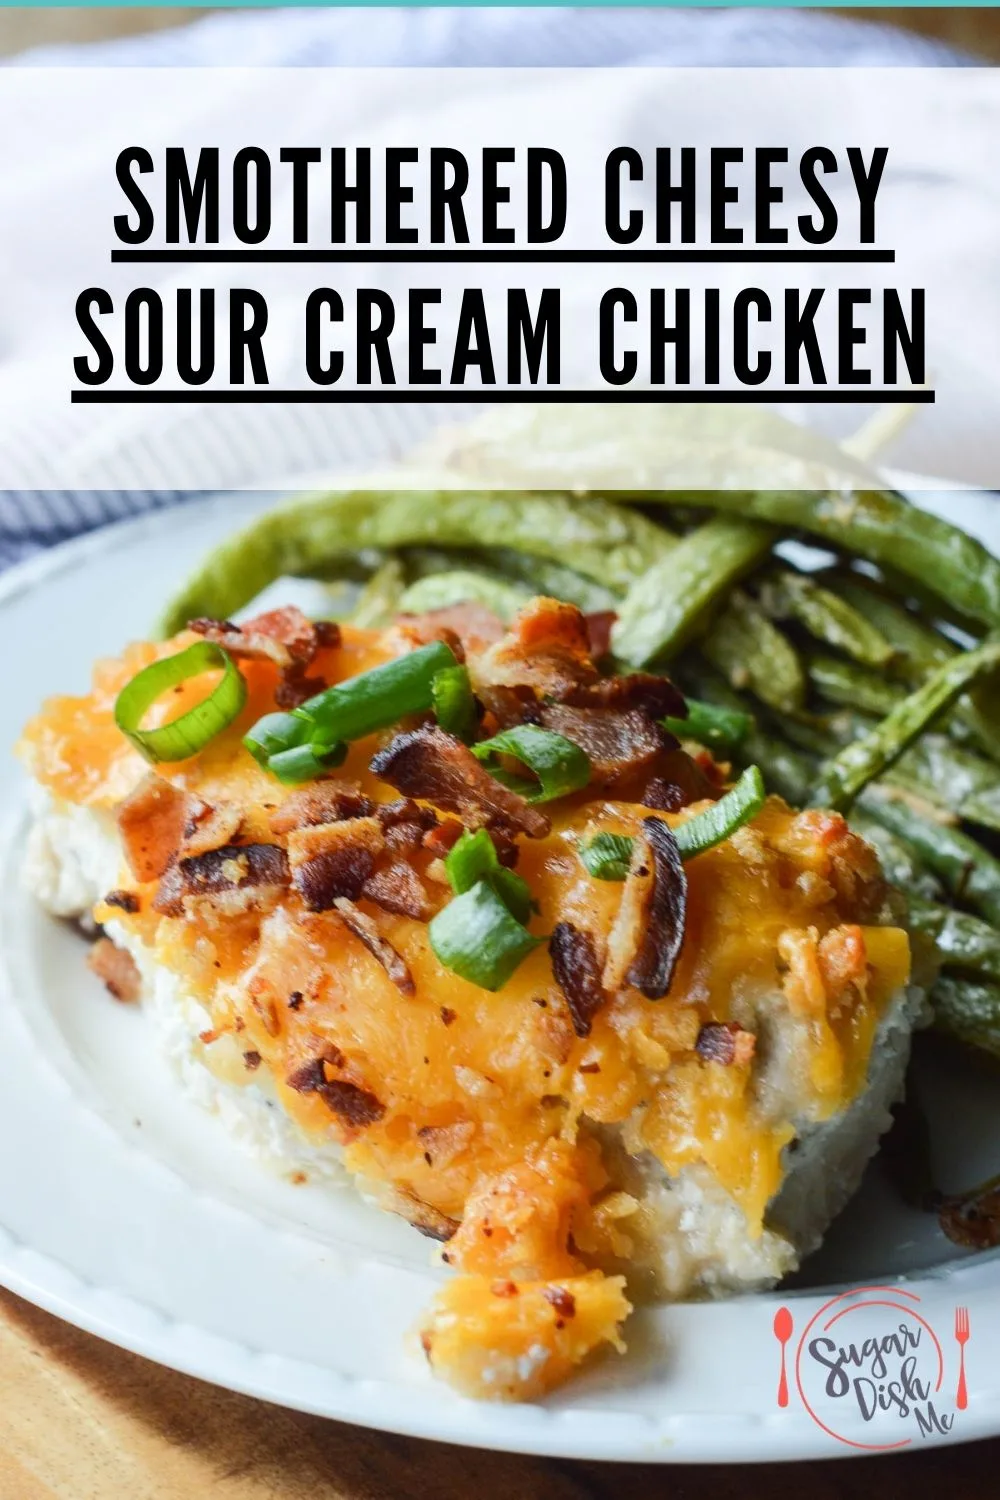 Smothered Cheesy Sour Cream Chicken Image with Text for saving to Pinterest